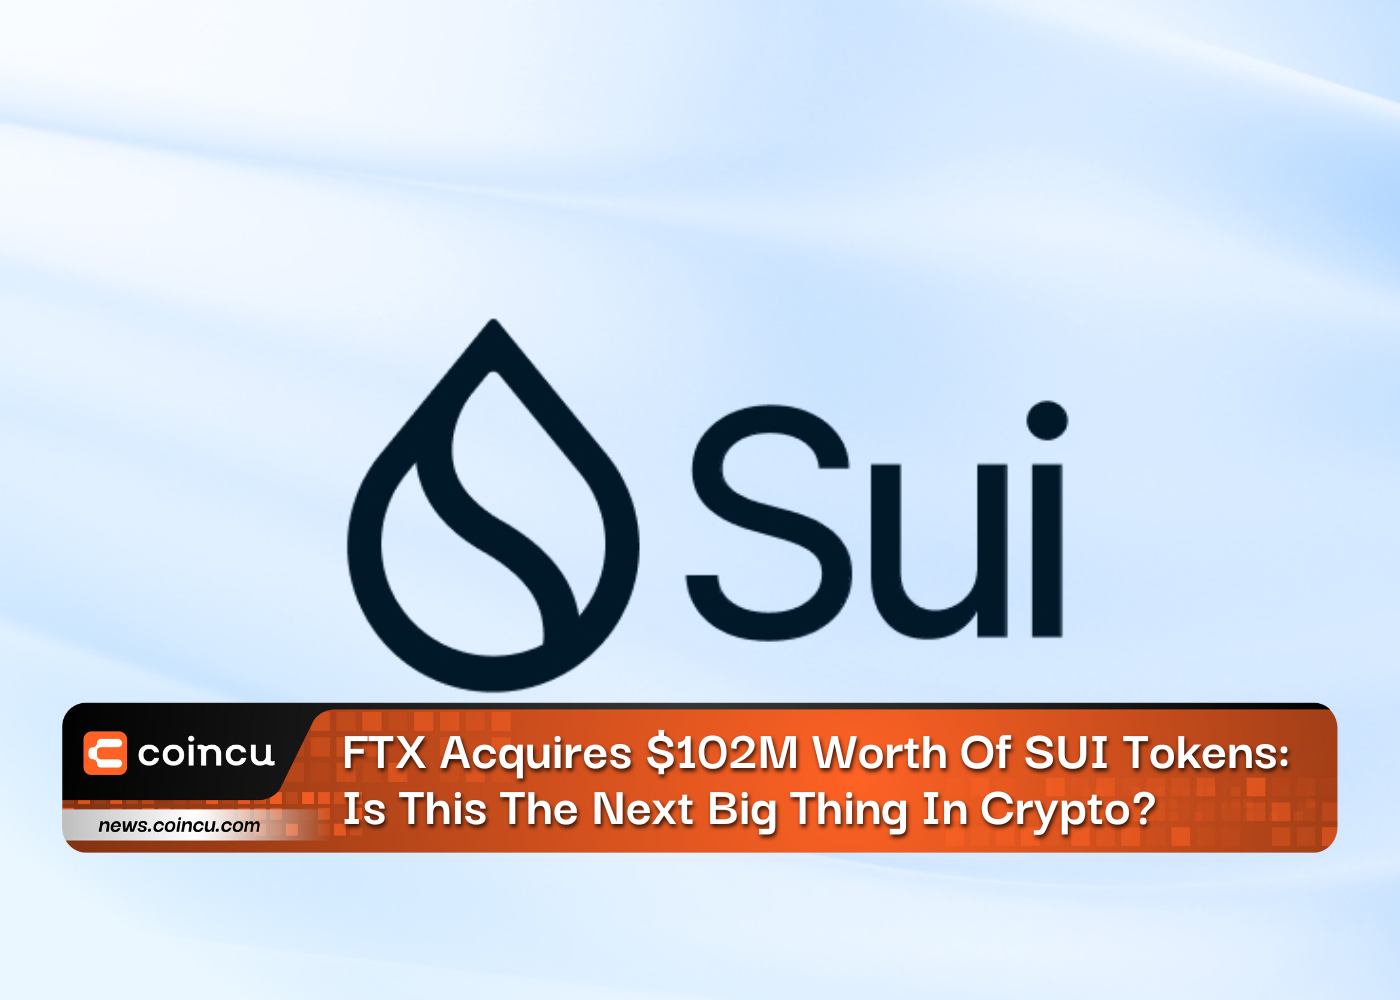 FTX Acquires $102M Worth Of SUI Tokens: Is This The Next Big Thing In Crypto?